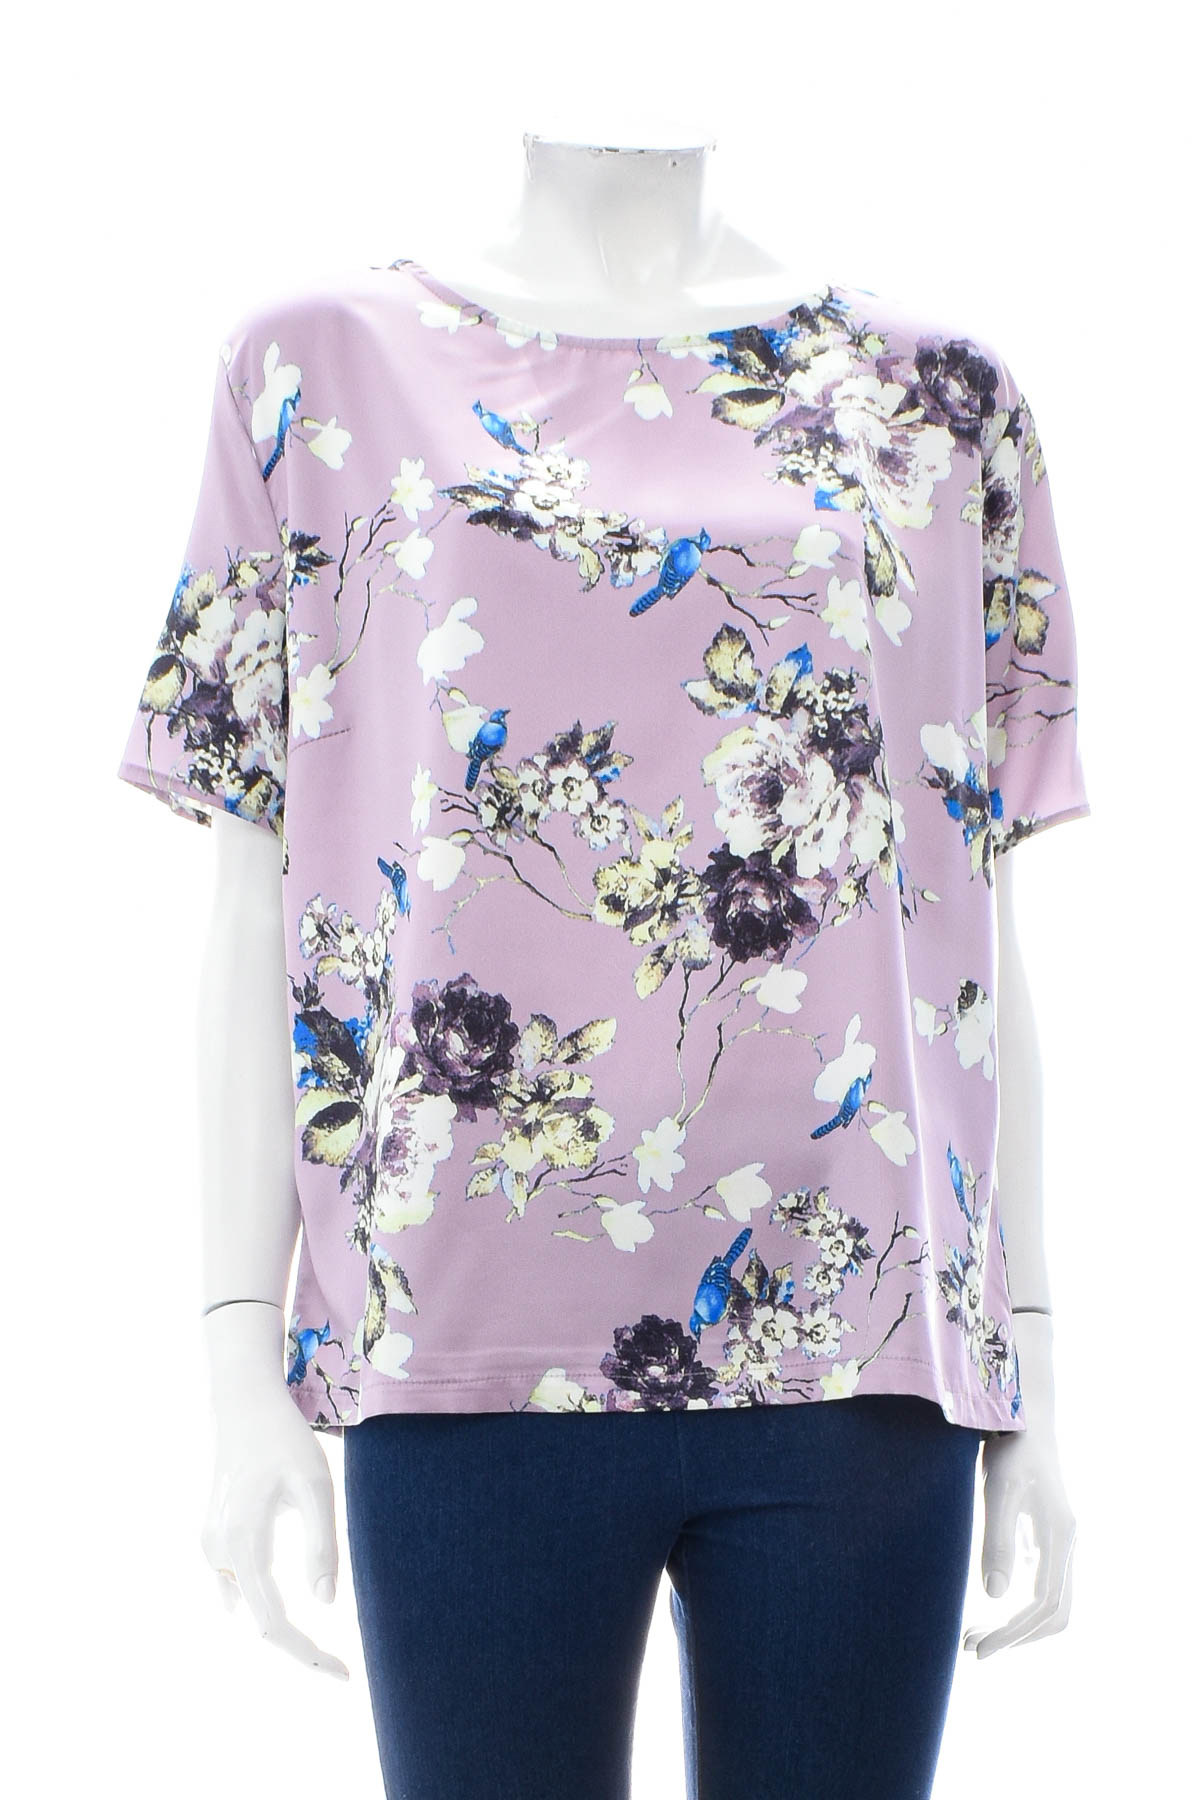 Women's shirt - Sisters Point - 0